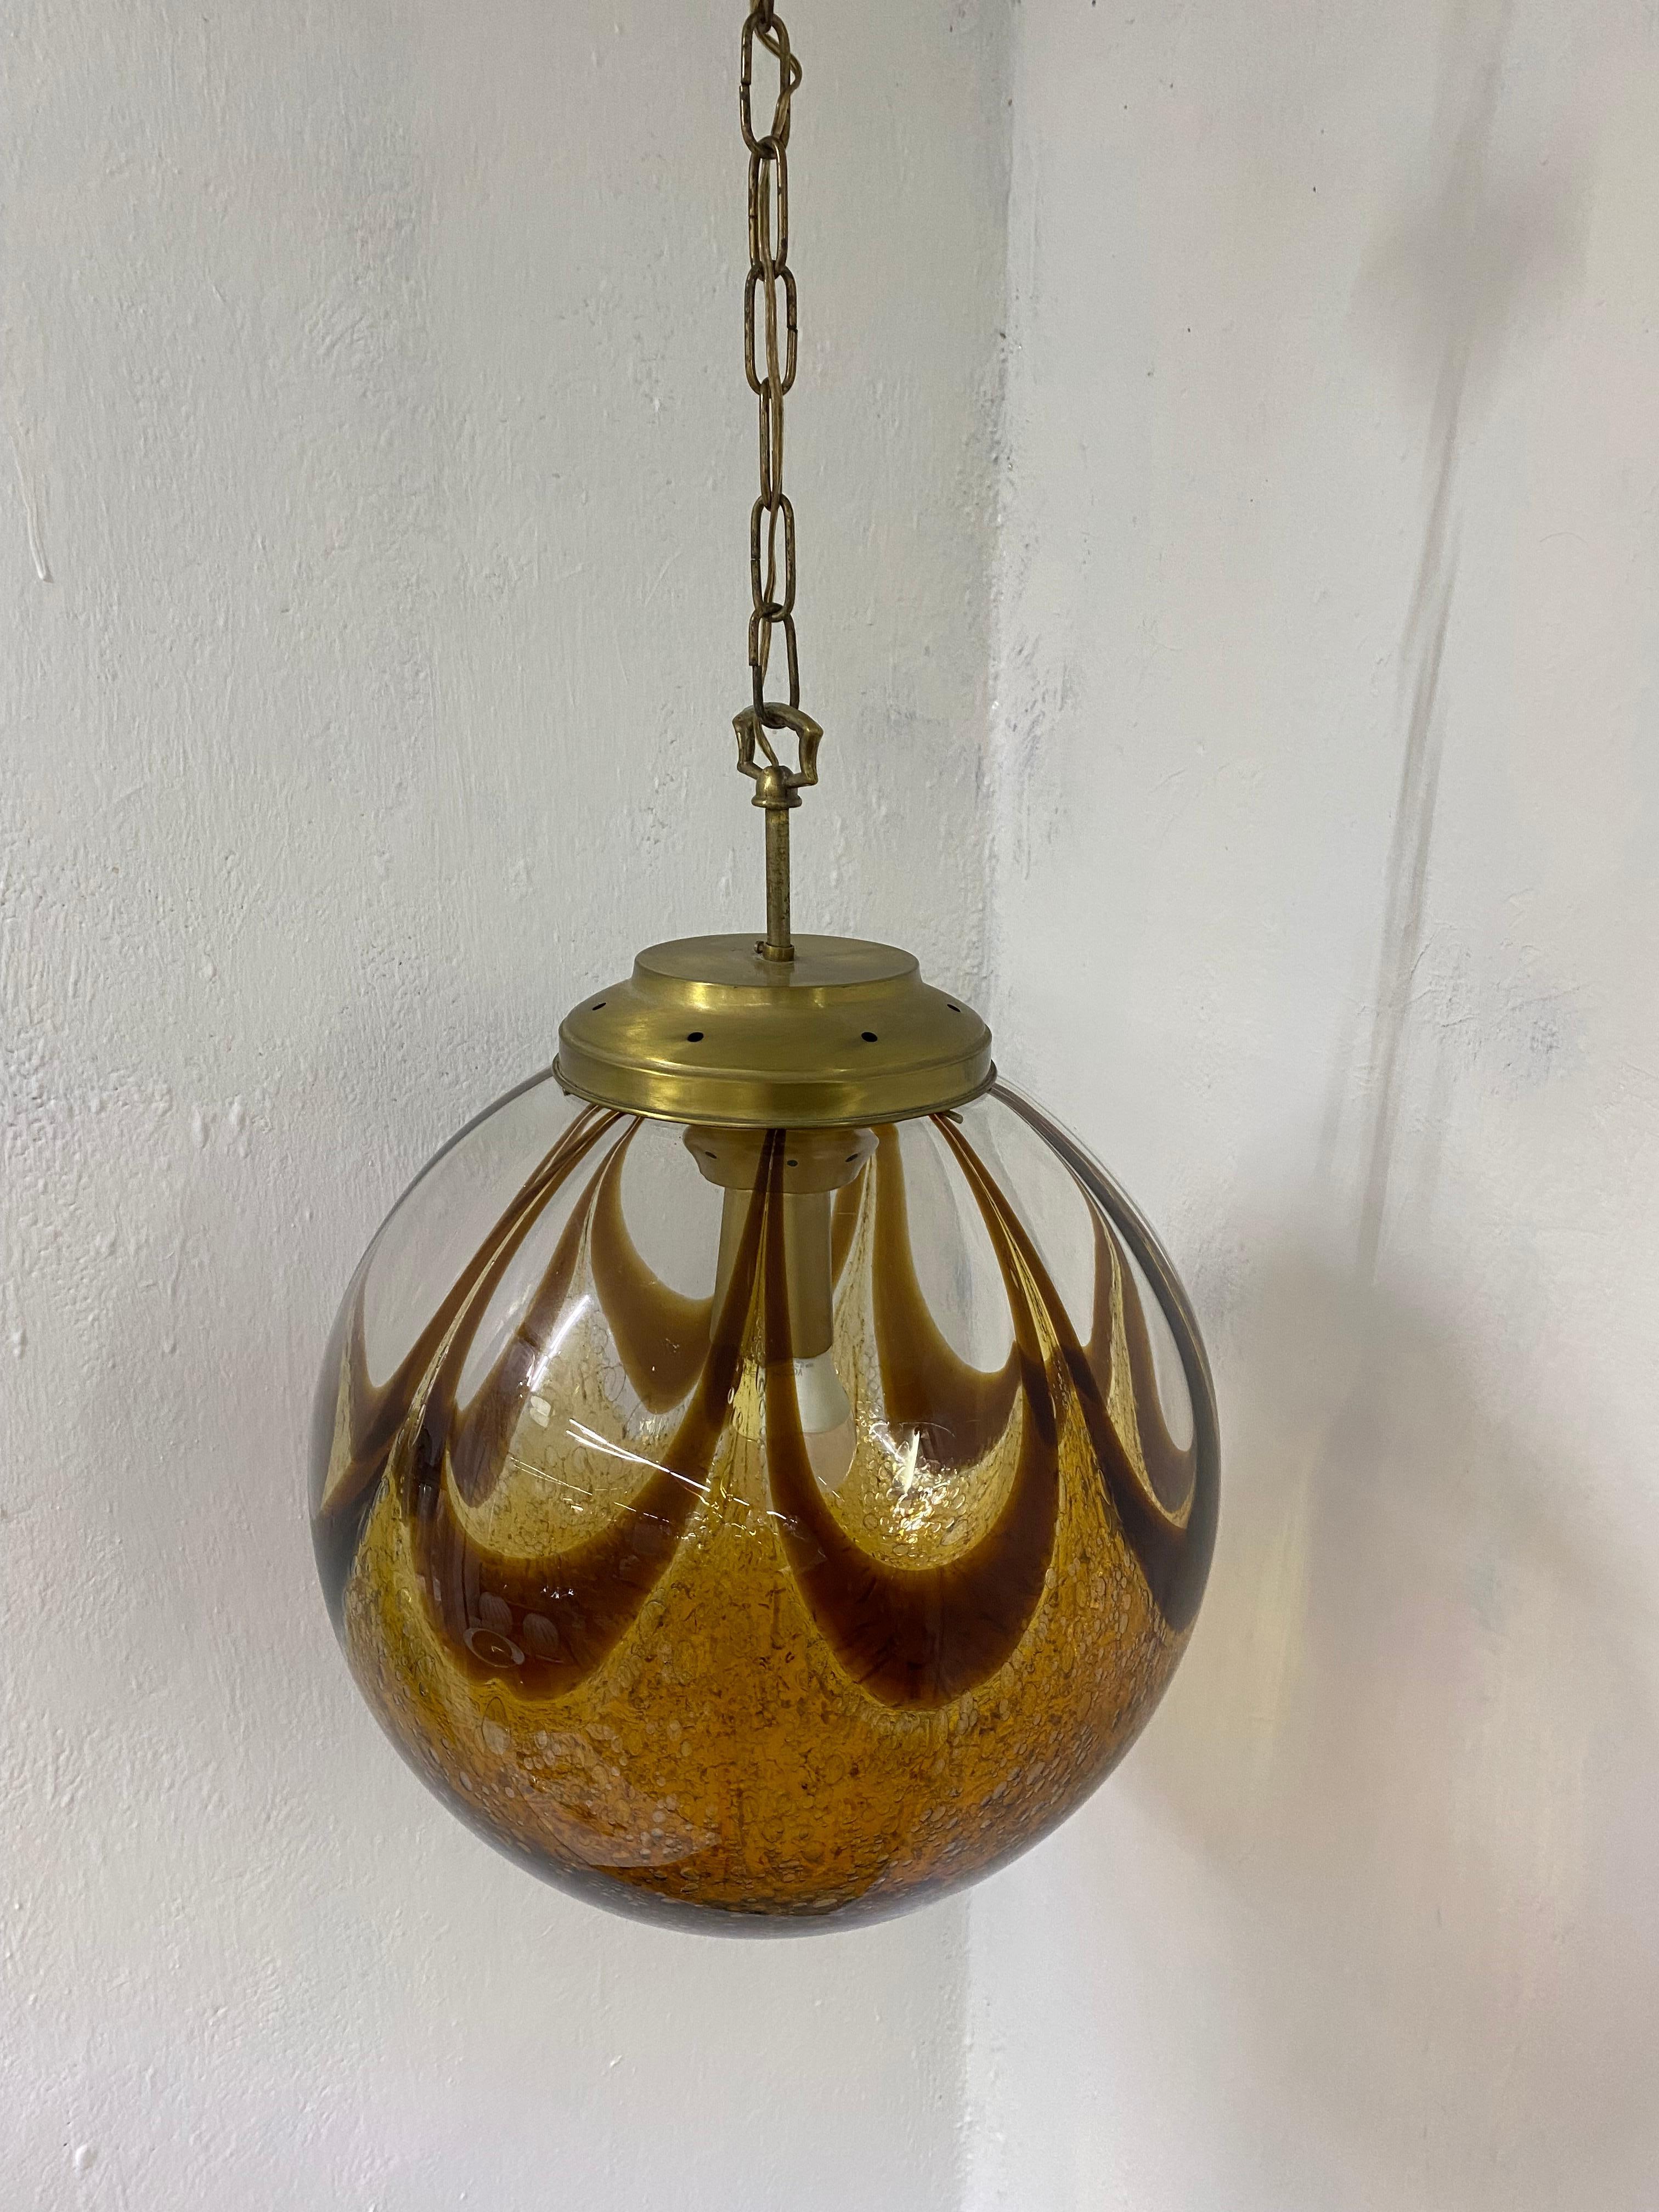 Hand-Crafted Murano Glass Sphere Chandelier in the Style of Mazzega, circa 1970 For Sale